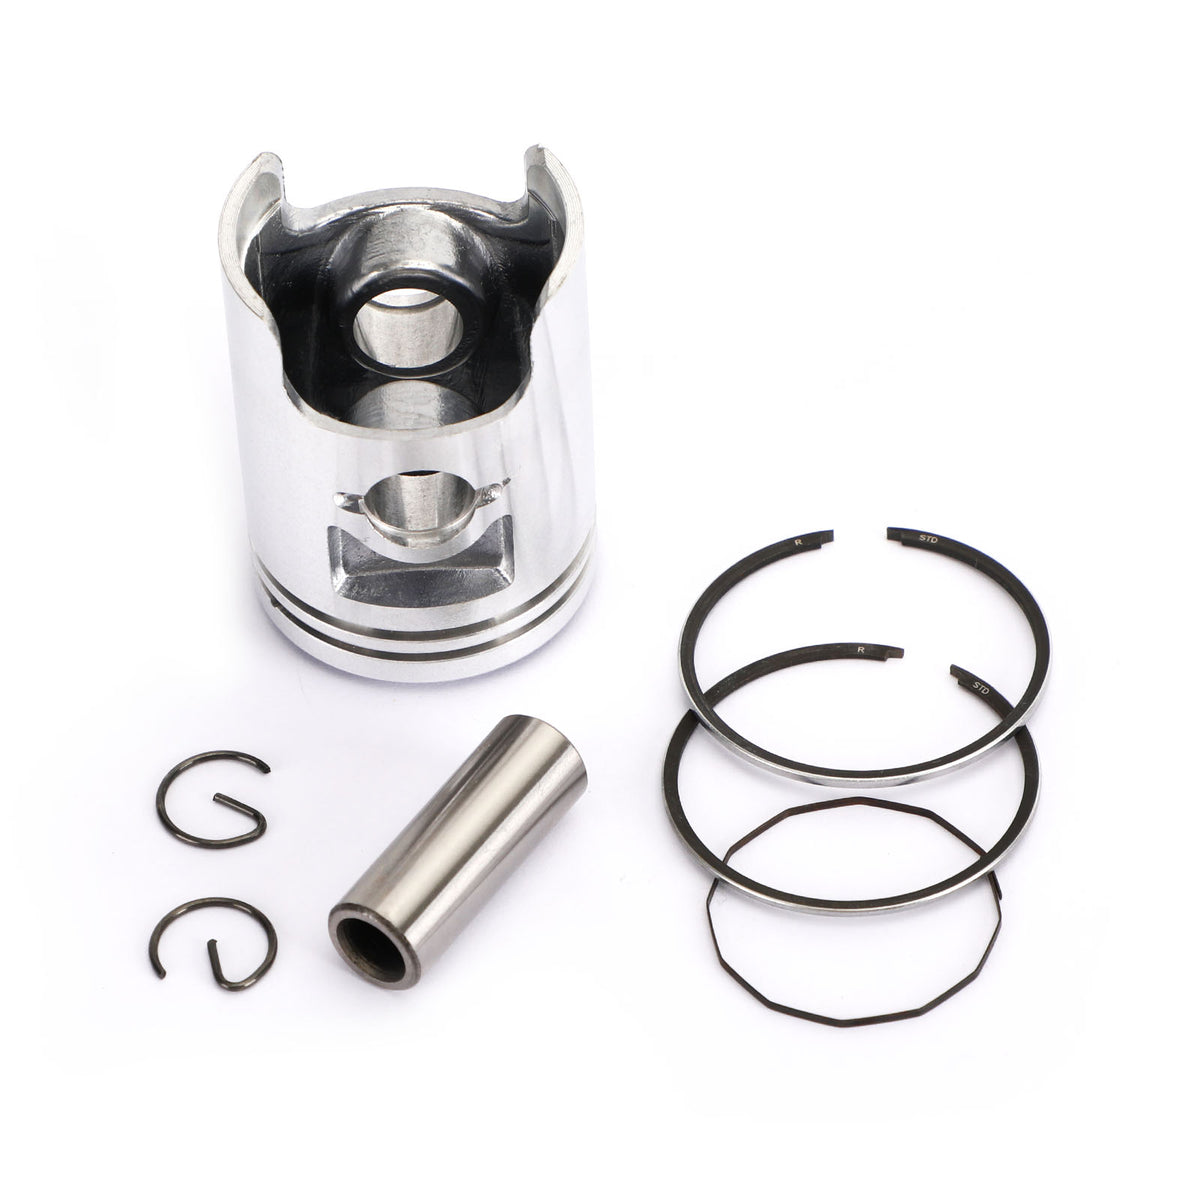 Piston Ring Kit Std 40Mm For Honda Dio Tact Cabina Julio Elite Scoopy Lead 50